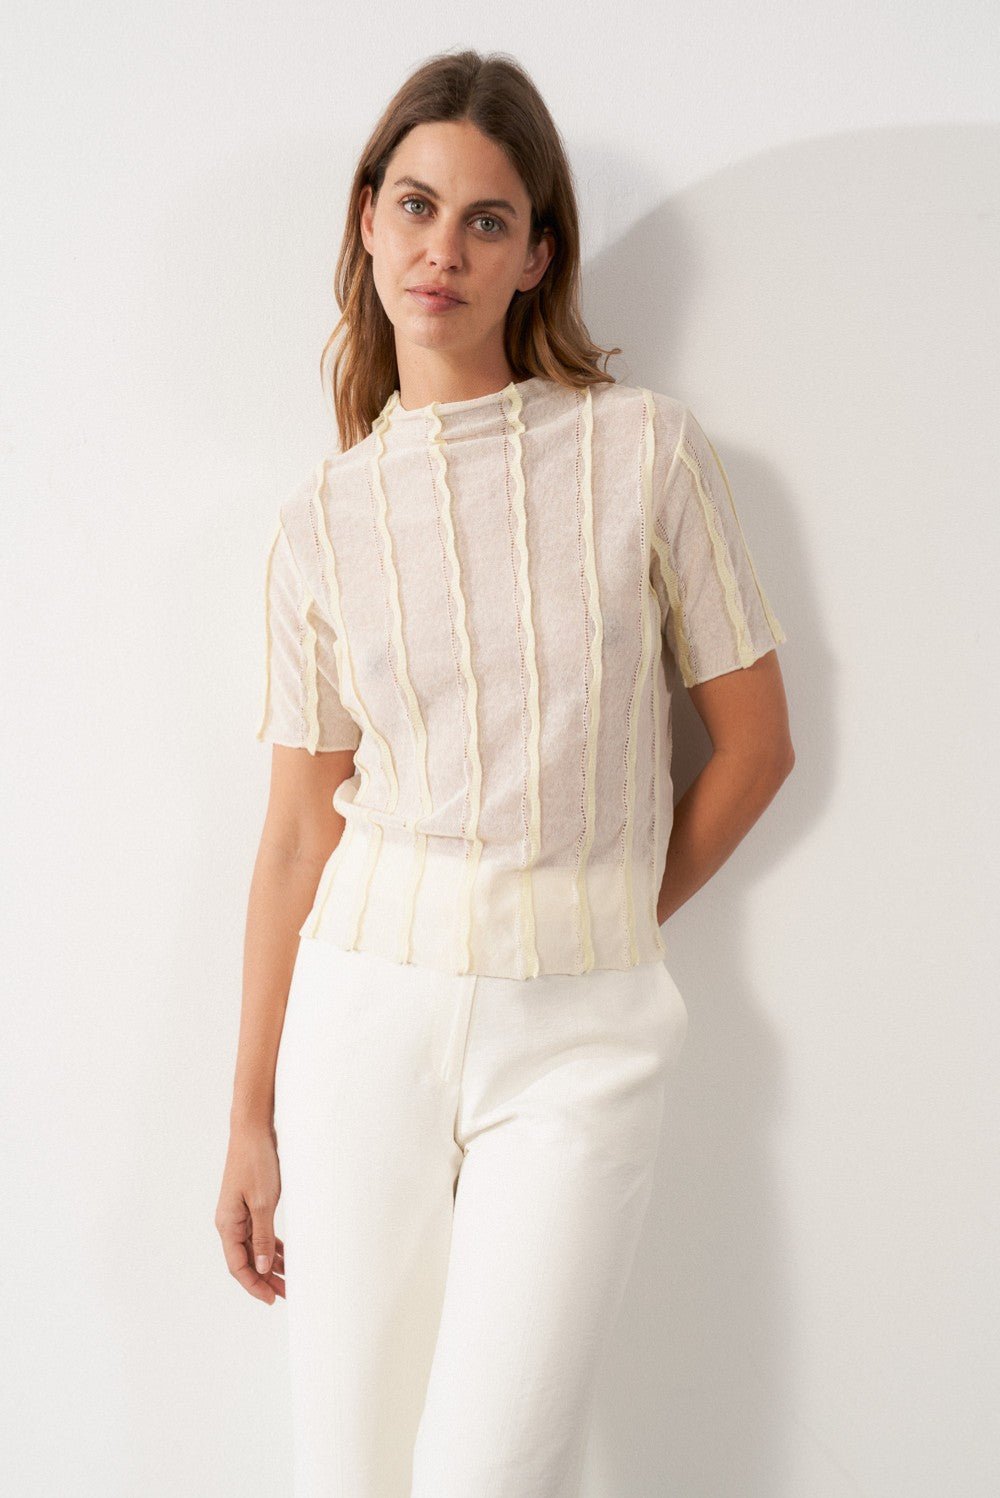 Sita Murt - S/S Textured Sweater: Natural - Shorely Chic Boutique